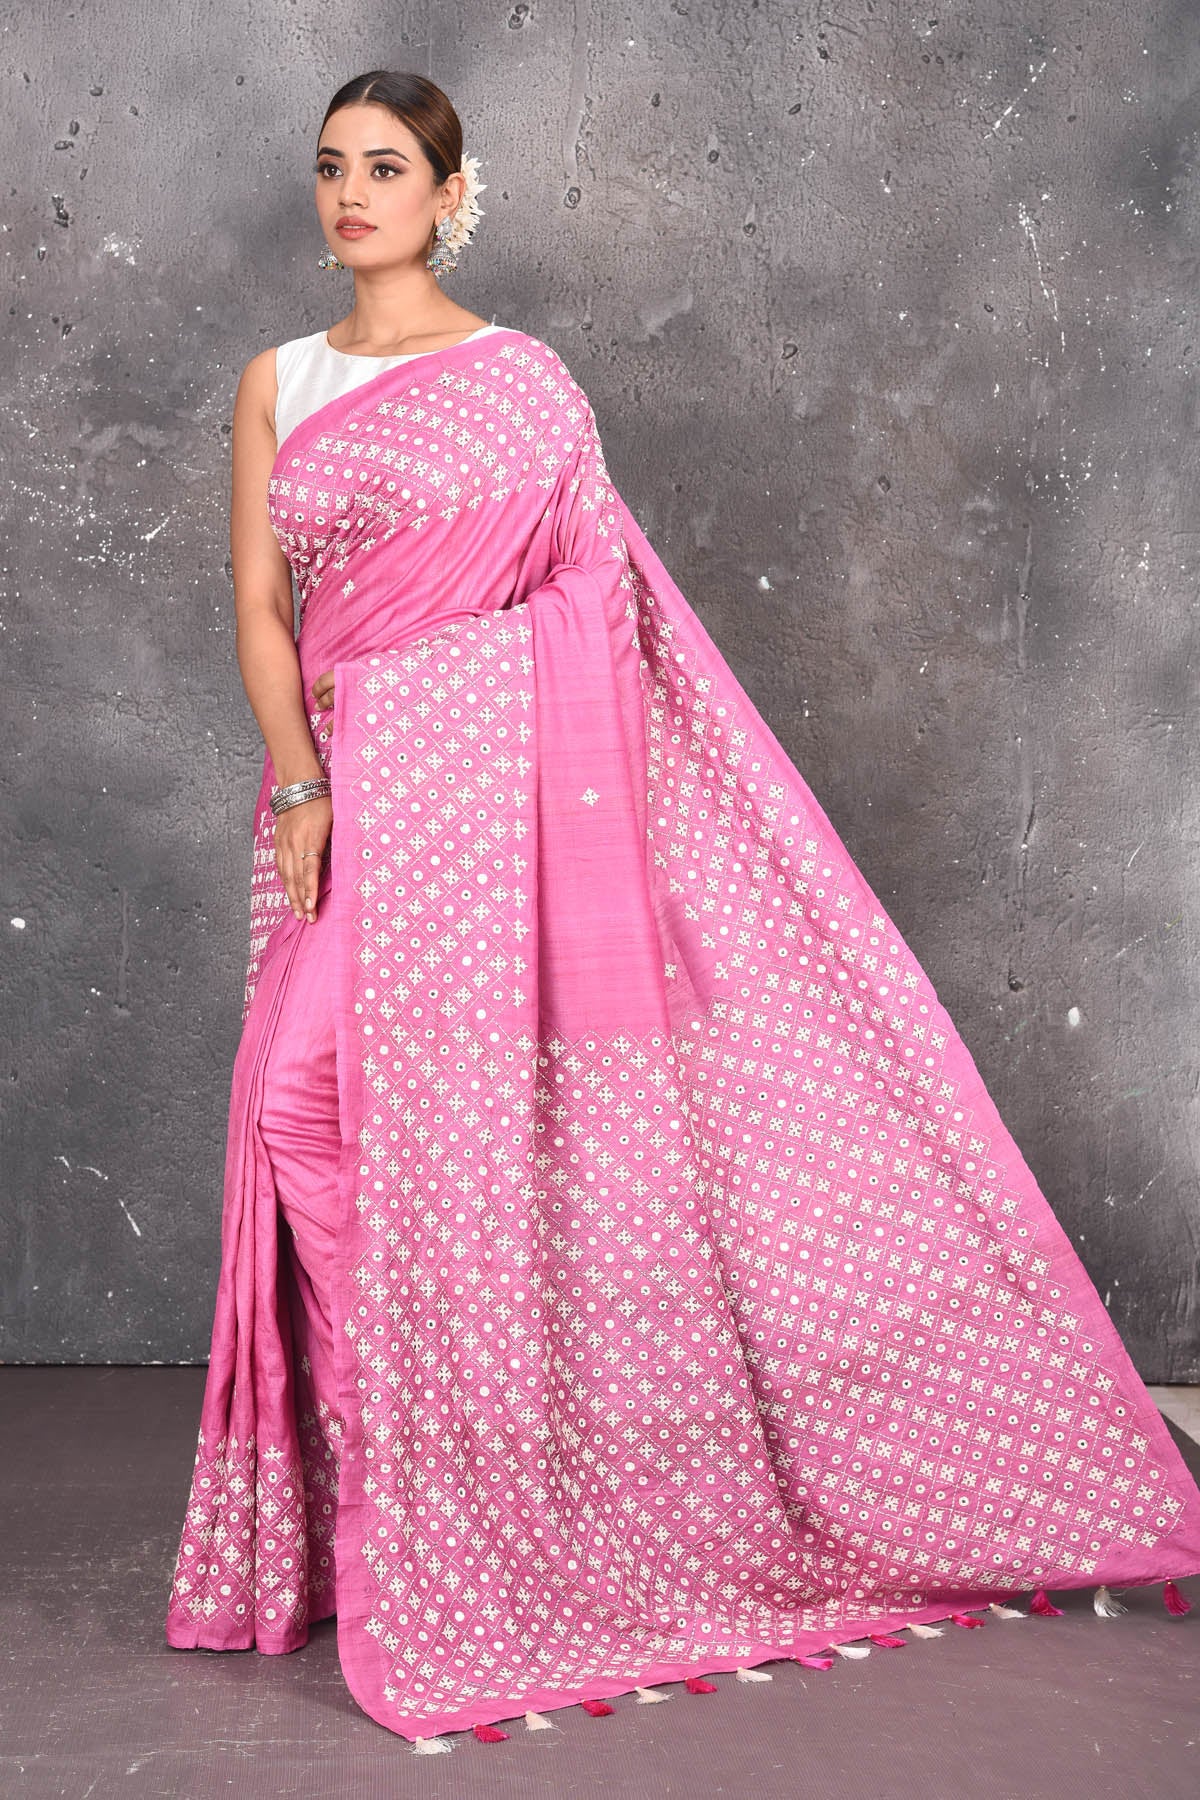 Shop elegant red zari woven pure tussar gicha silk saree in pink color with beautiful mirrorwork online in USA which has crafted by skilled weaver of Banaras with elegance and grace, this saree is definitely the epitome of beauty and a must have in your collection. Buy designer handwoven sarees from Pure Elegance which brings you our latest collection of Bhagalpuri handwoven tussar silk sarees.-Full view with open pallu